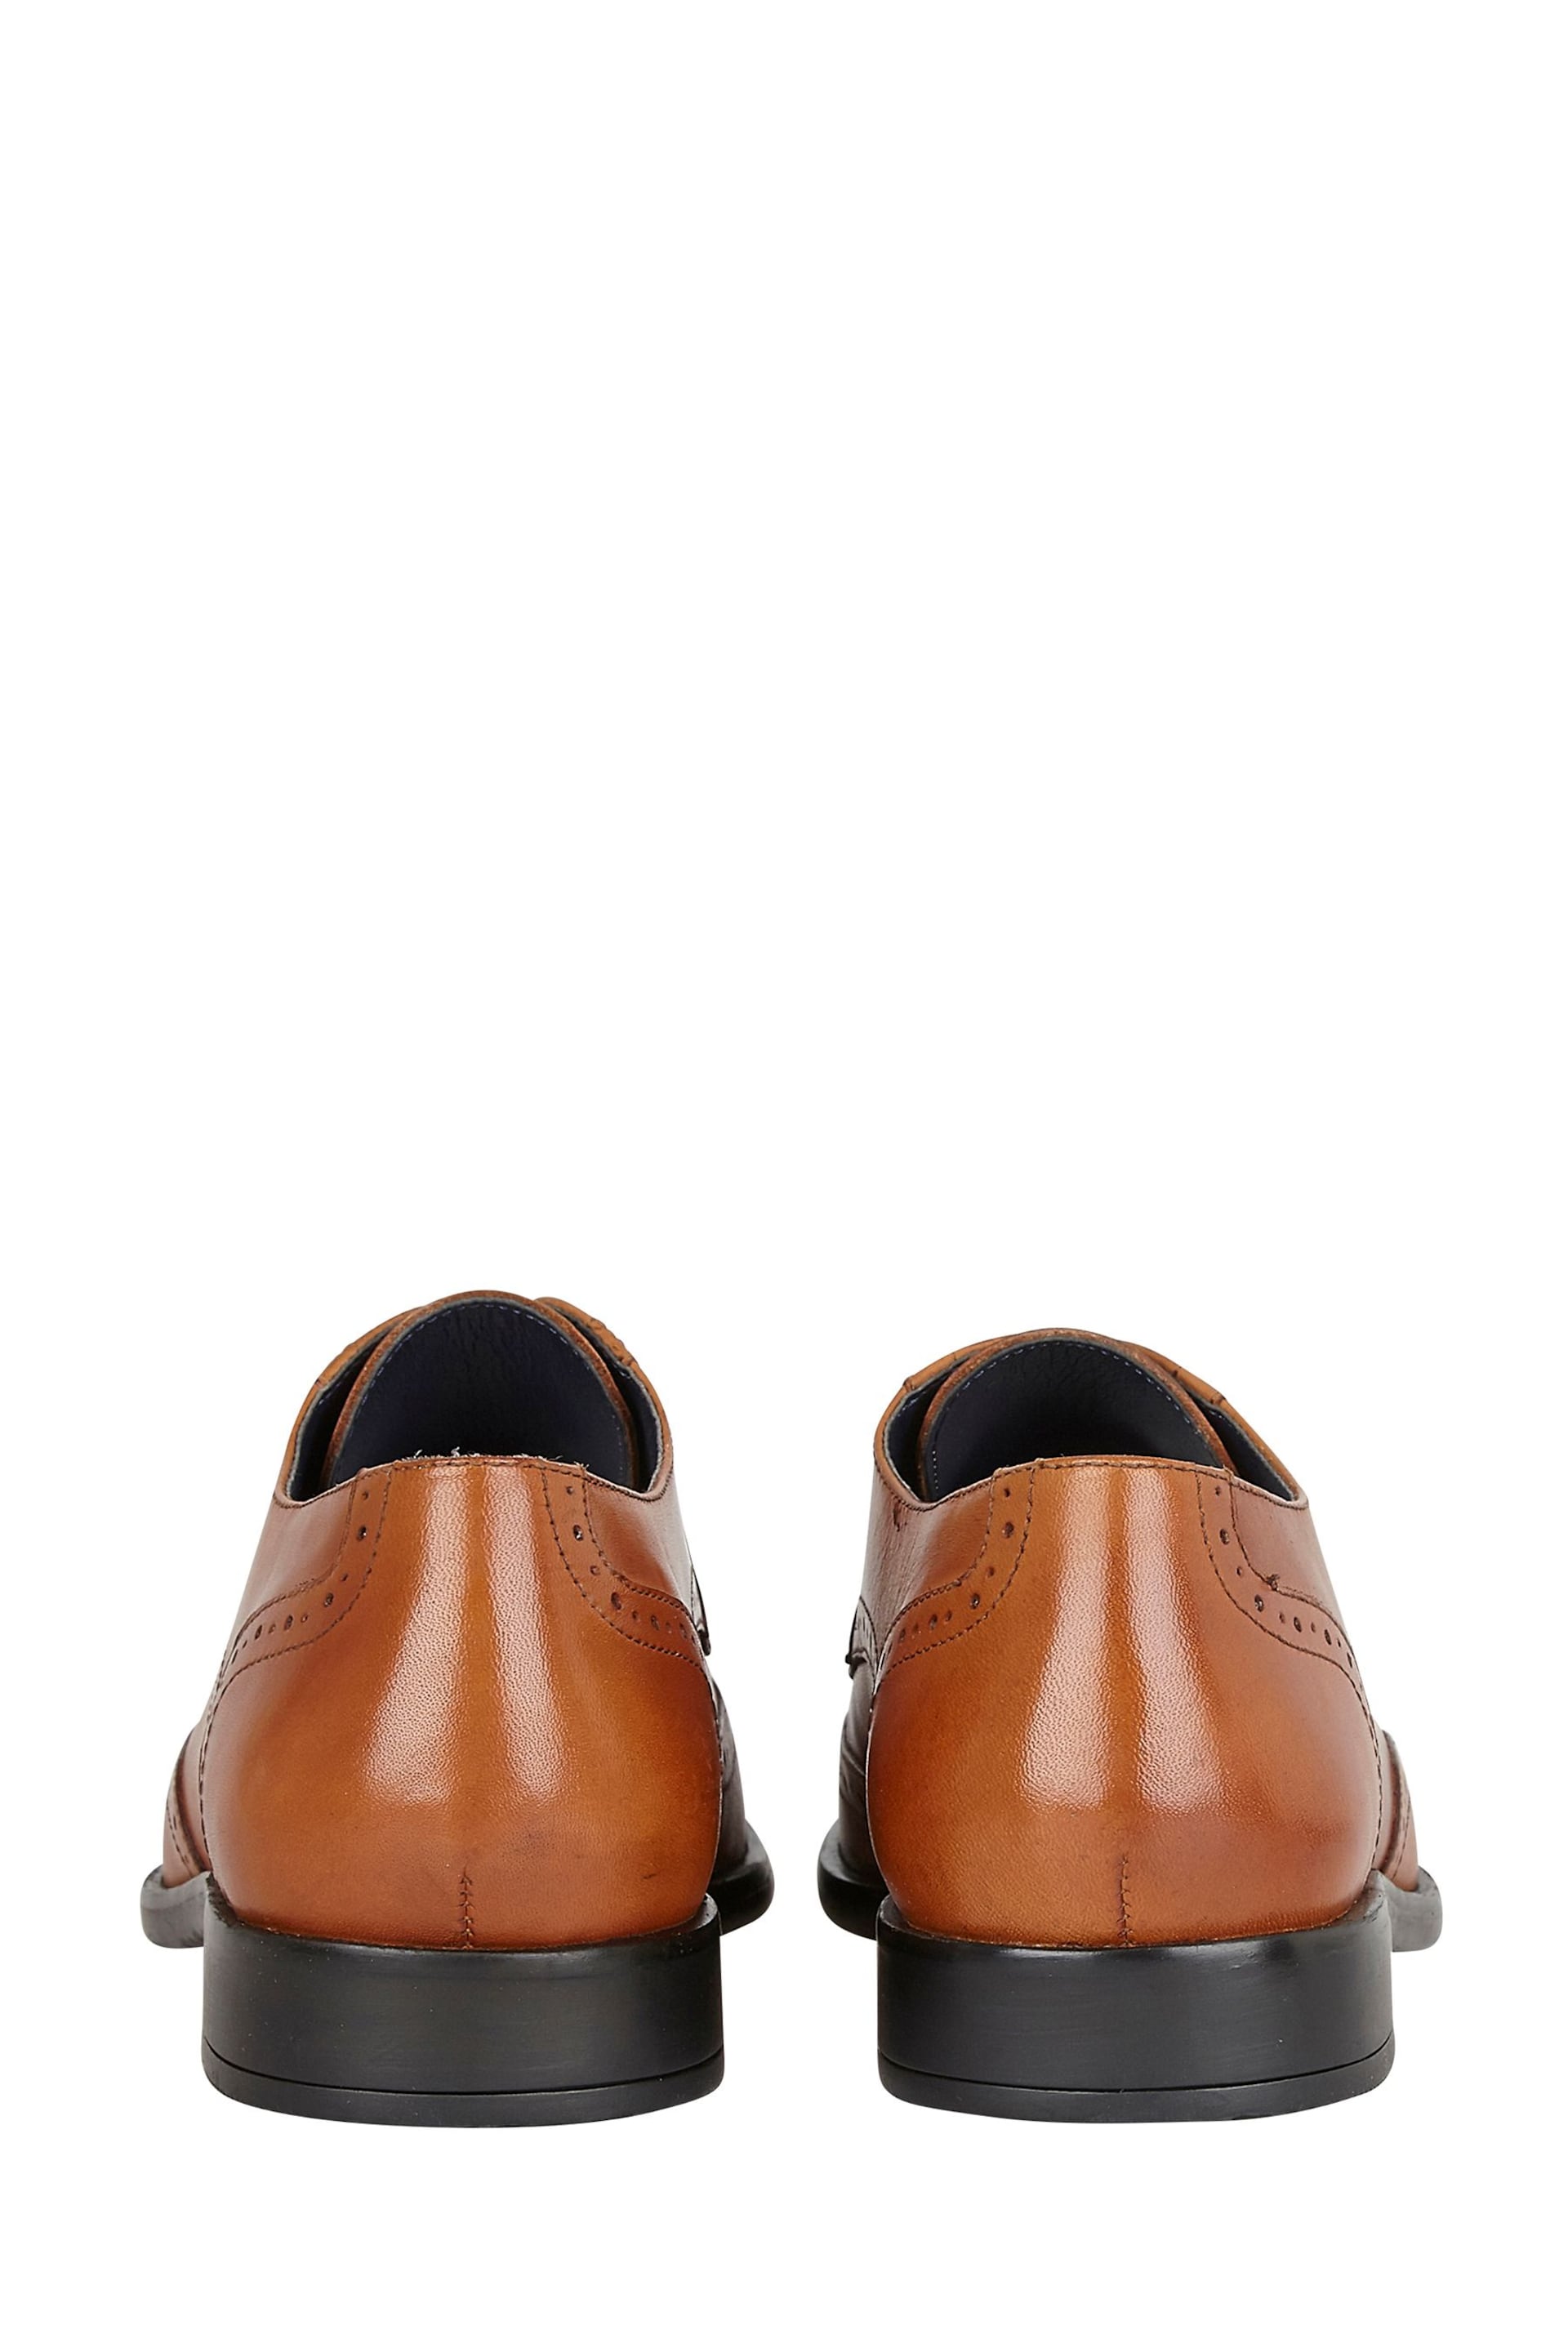 Lotus Brown Leather Lace-Up Brogues - Image 3 of 4